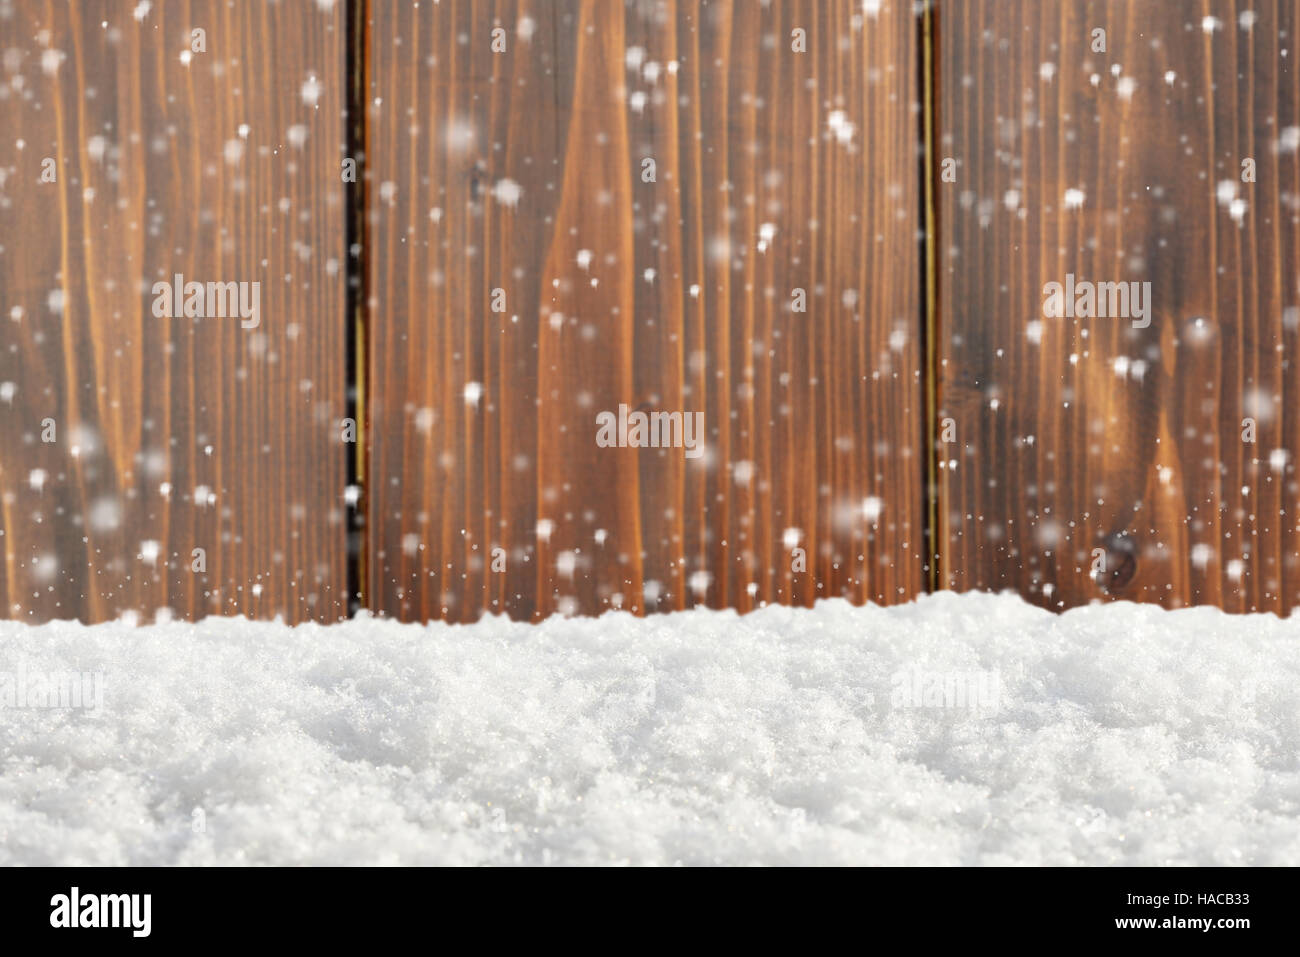 Old wooden background with snowfall and snowdrift Stock Photo